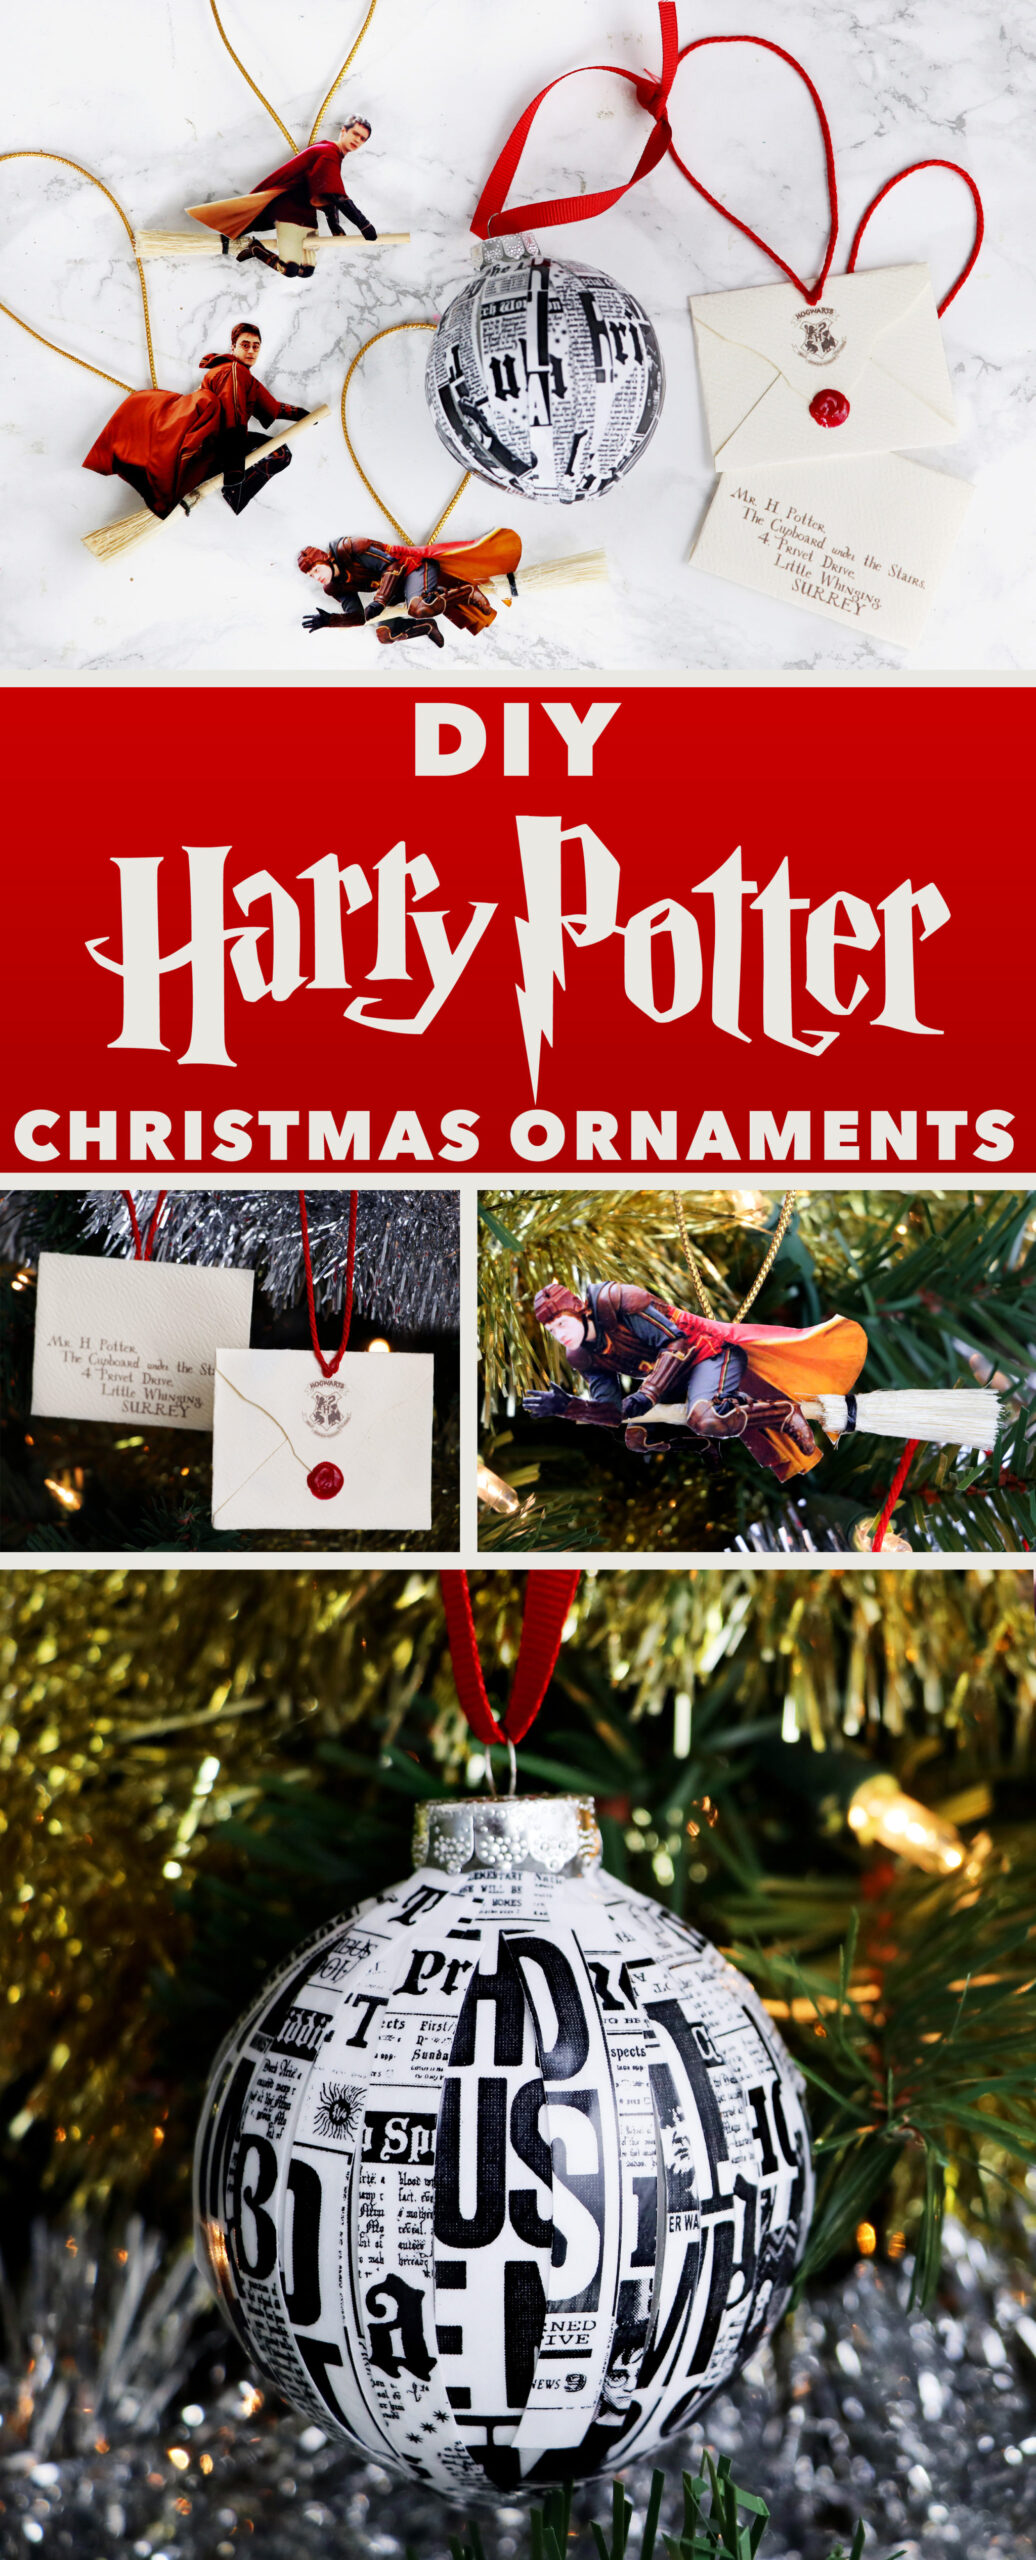 DIY Harry Potter Christmas Ornaments ~ Project For Awesome 2016 - Karen  Kavett